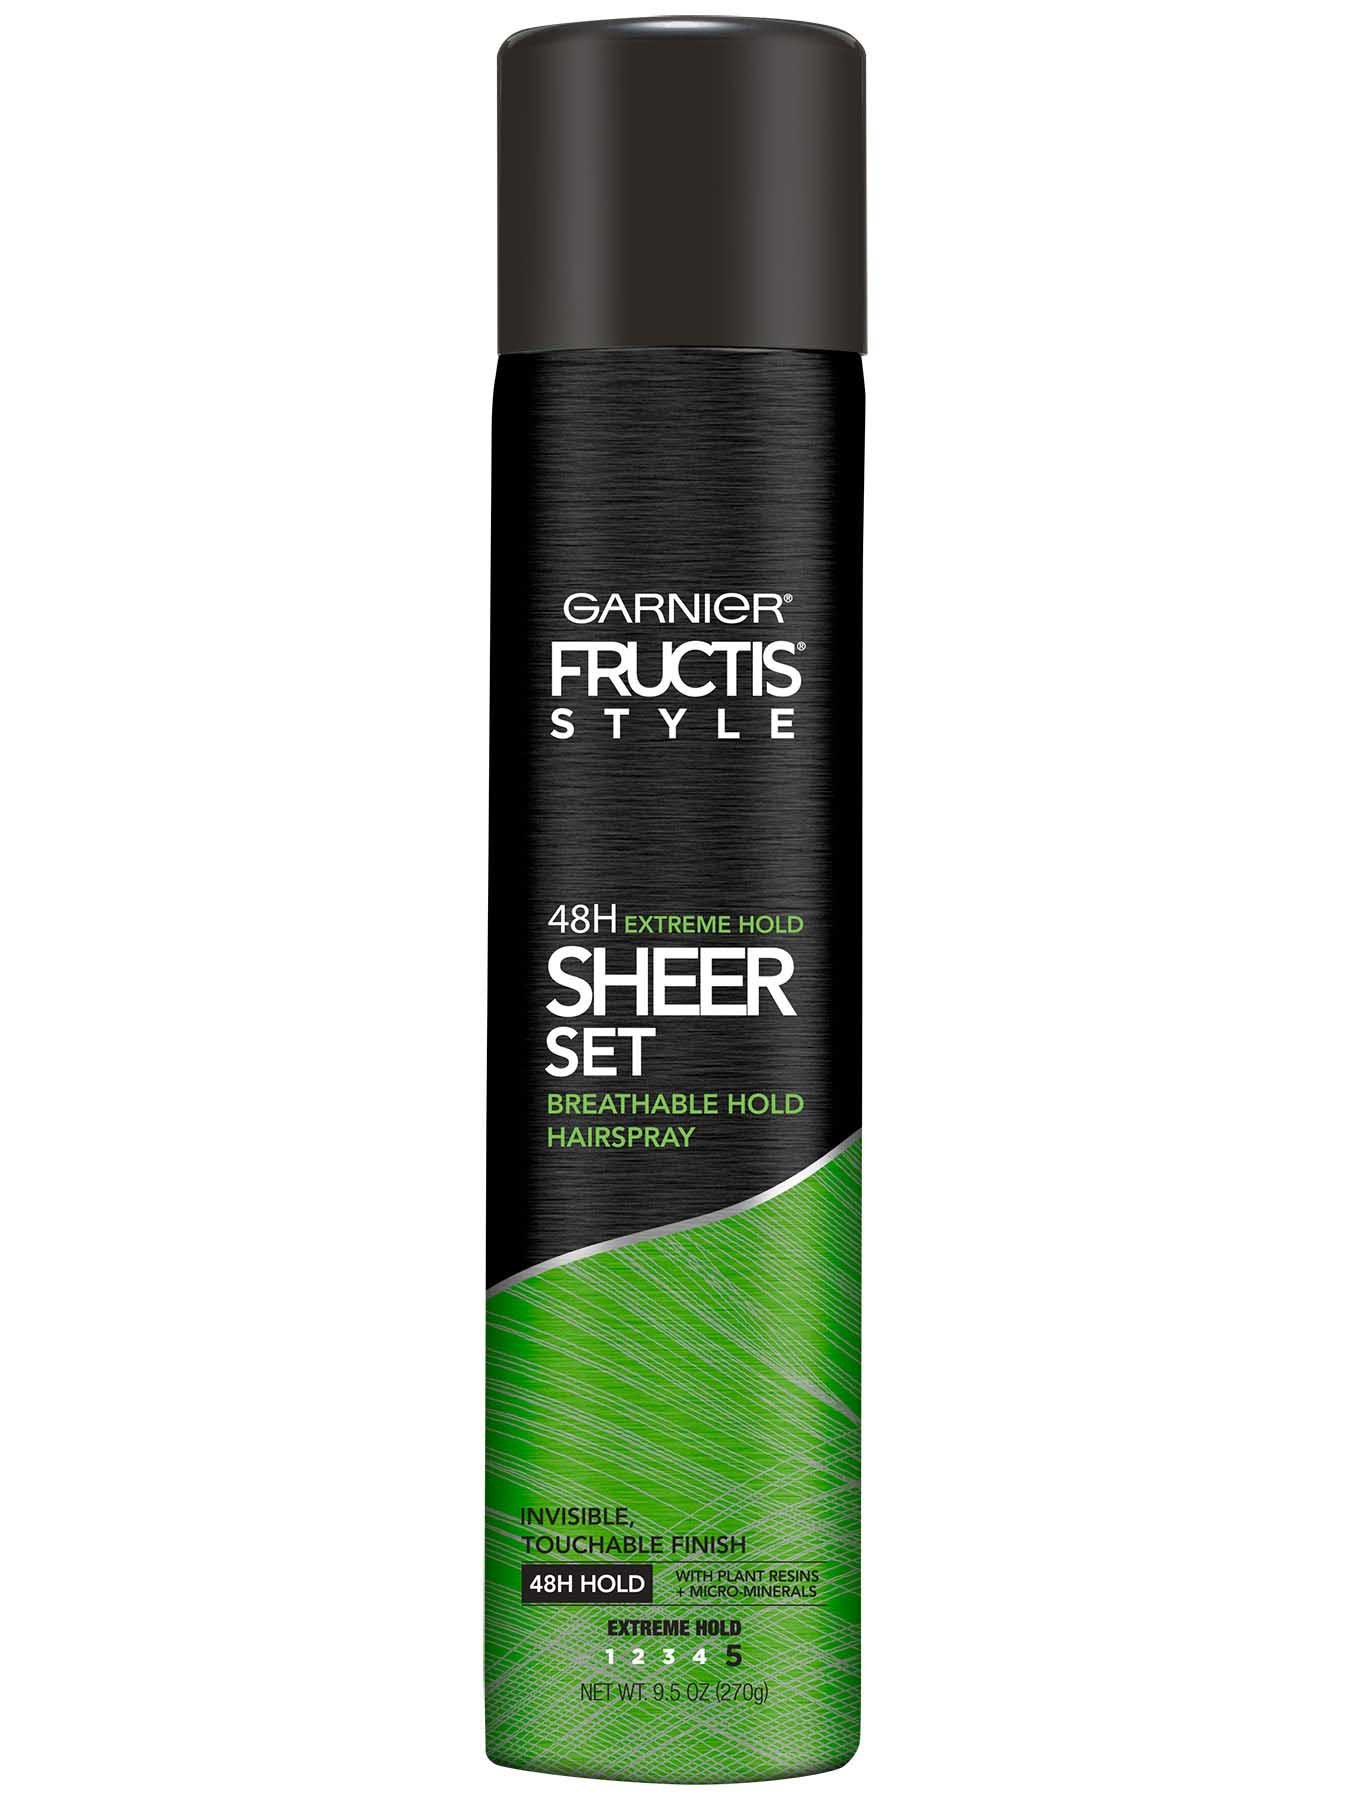 Front view of Sheer Set Extreme Hold Breathable Hairspray.